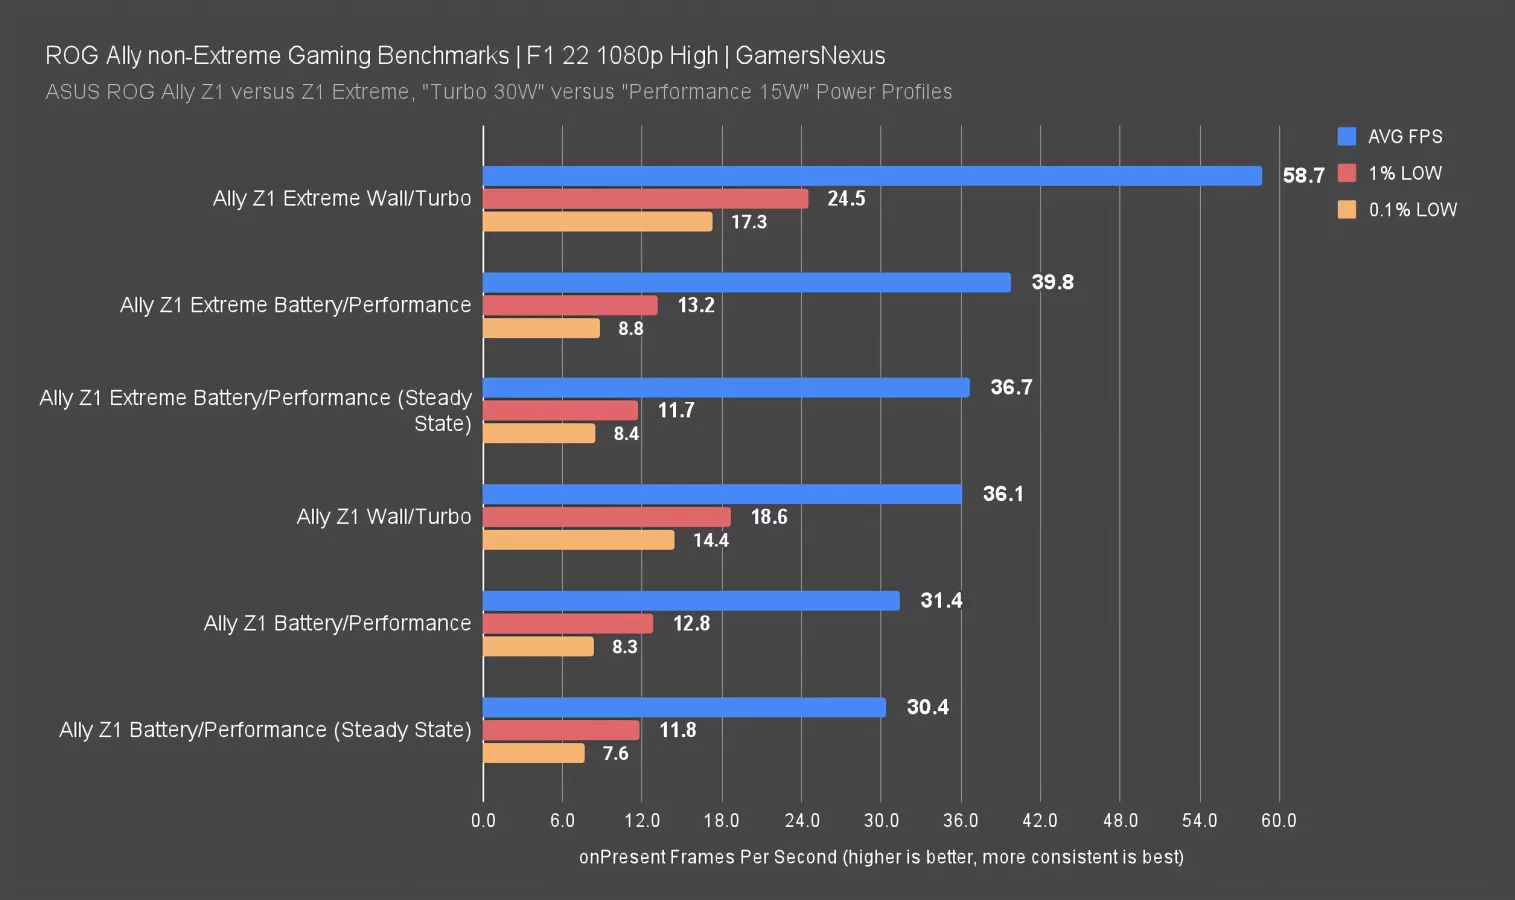 ASUS ROG Ally Gaming Benchmarks Show AMD Z1 Extreme 42% Faster at 1080p &  34% Faster at 720p Versus Standard Z1 APU